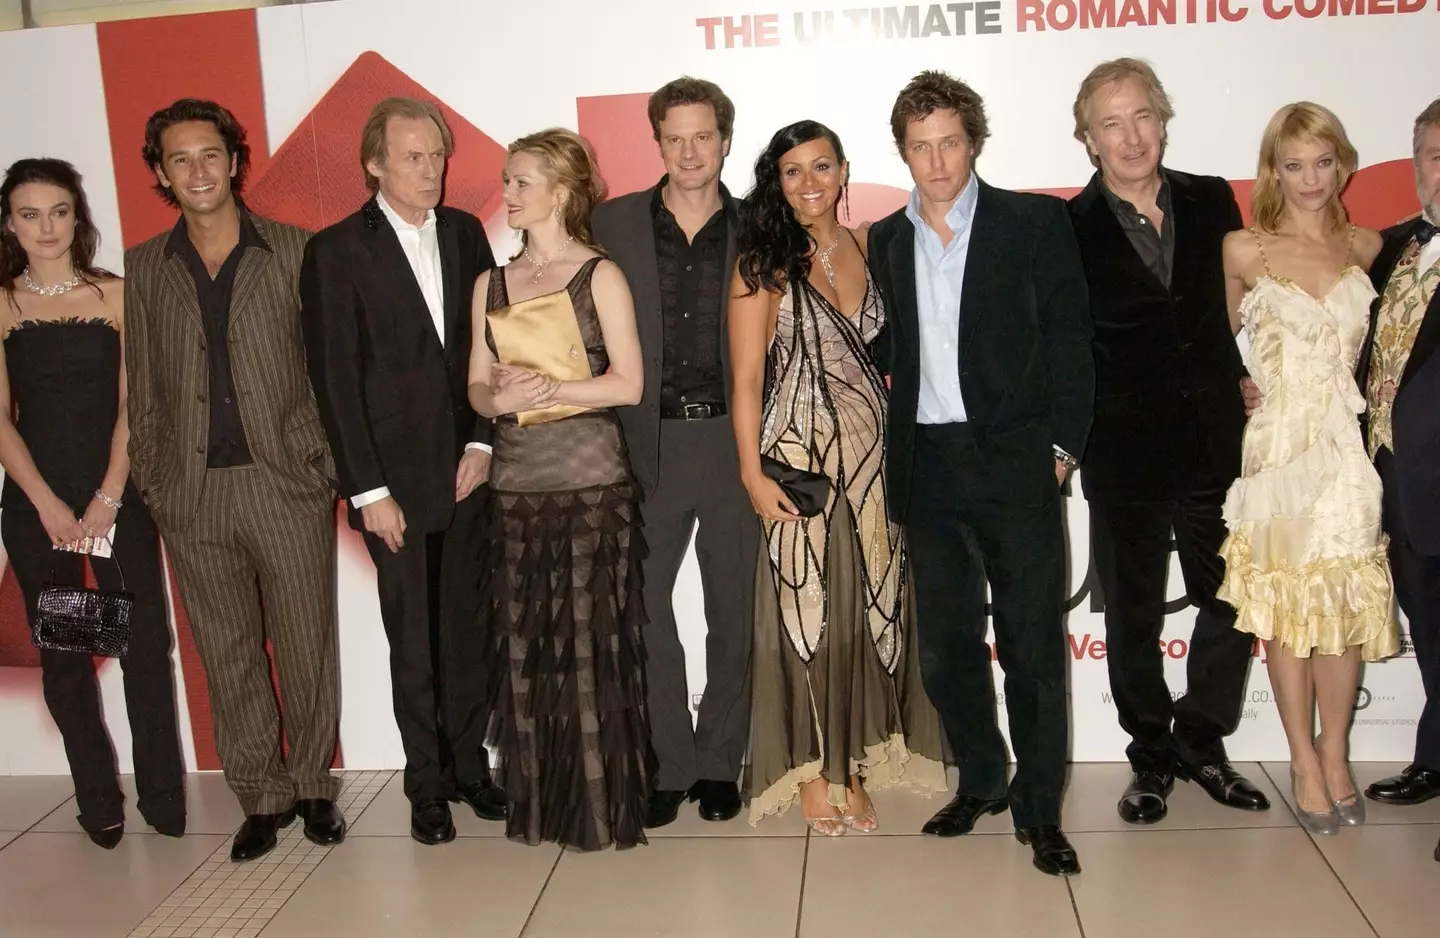 Love Actually, which boasted an all star cast, was released in 2003.